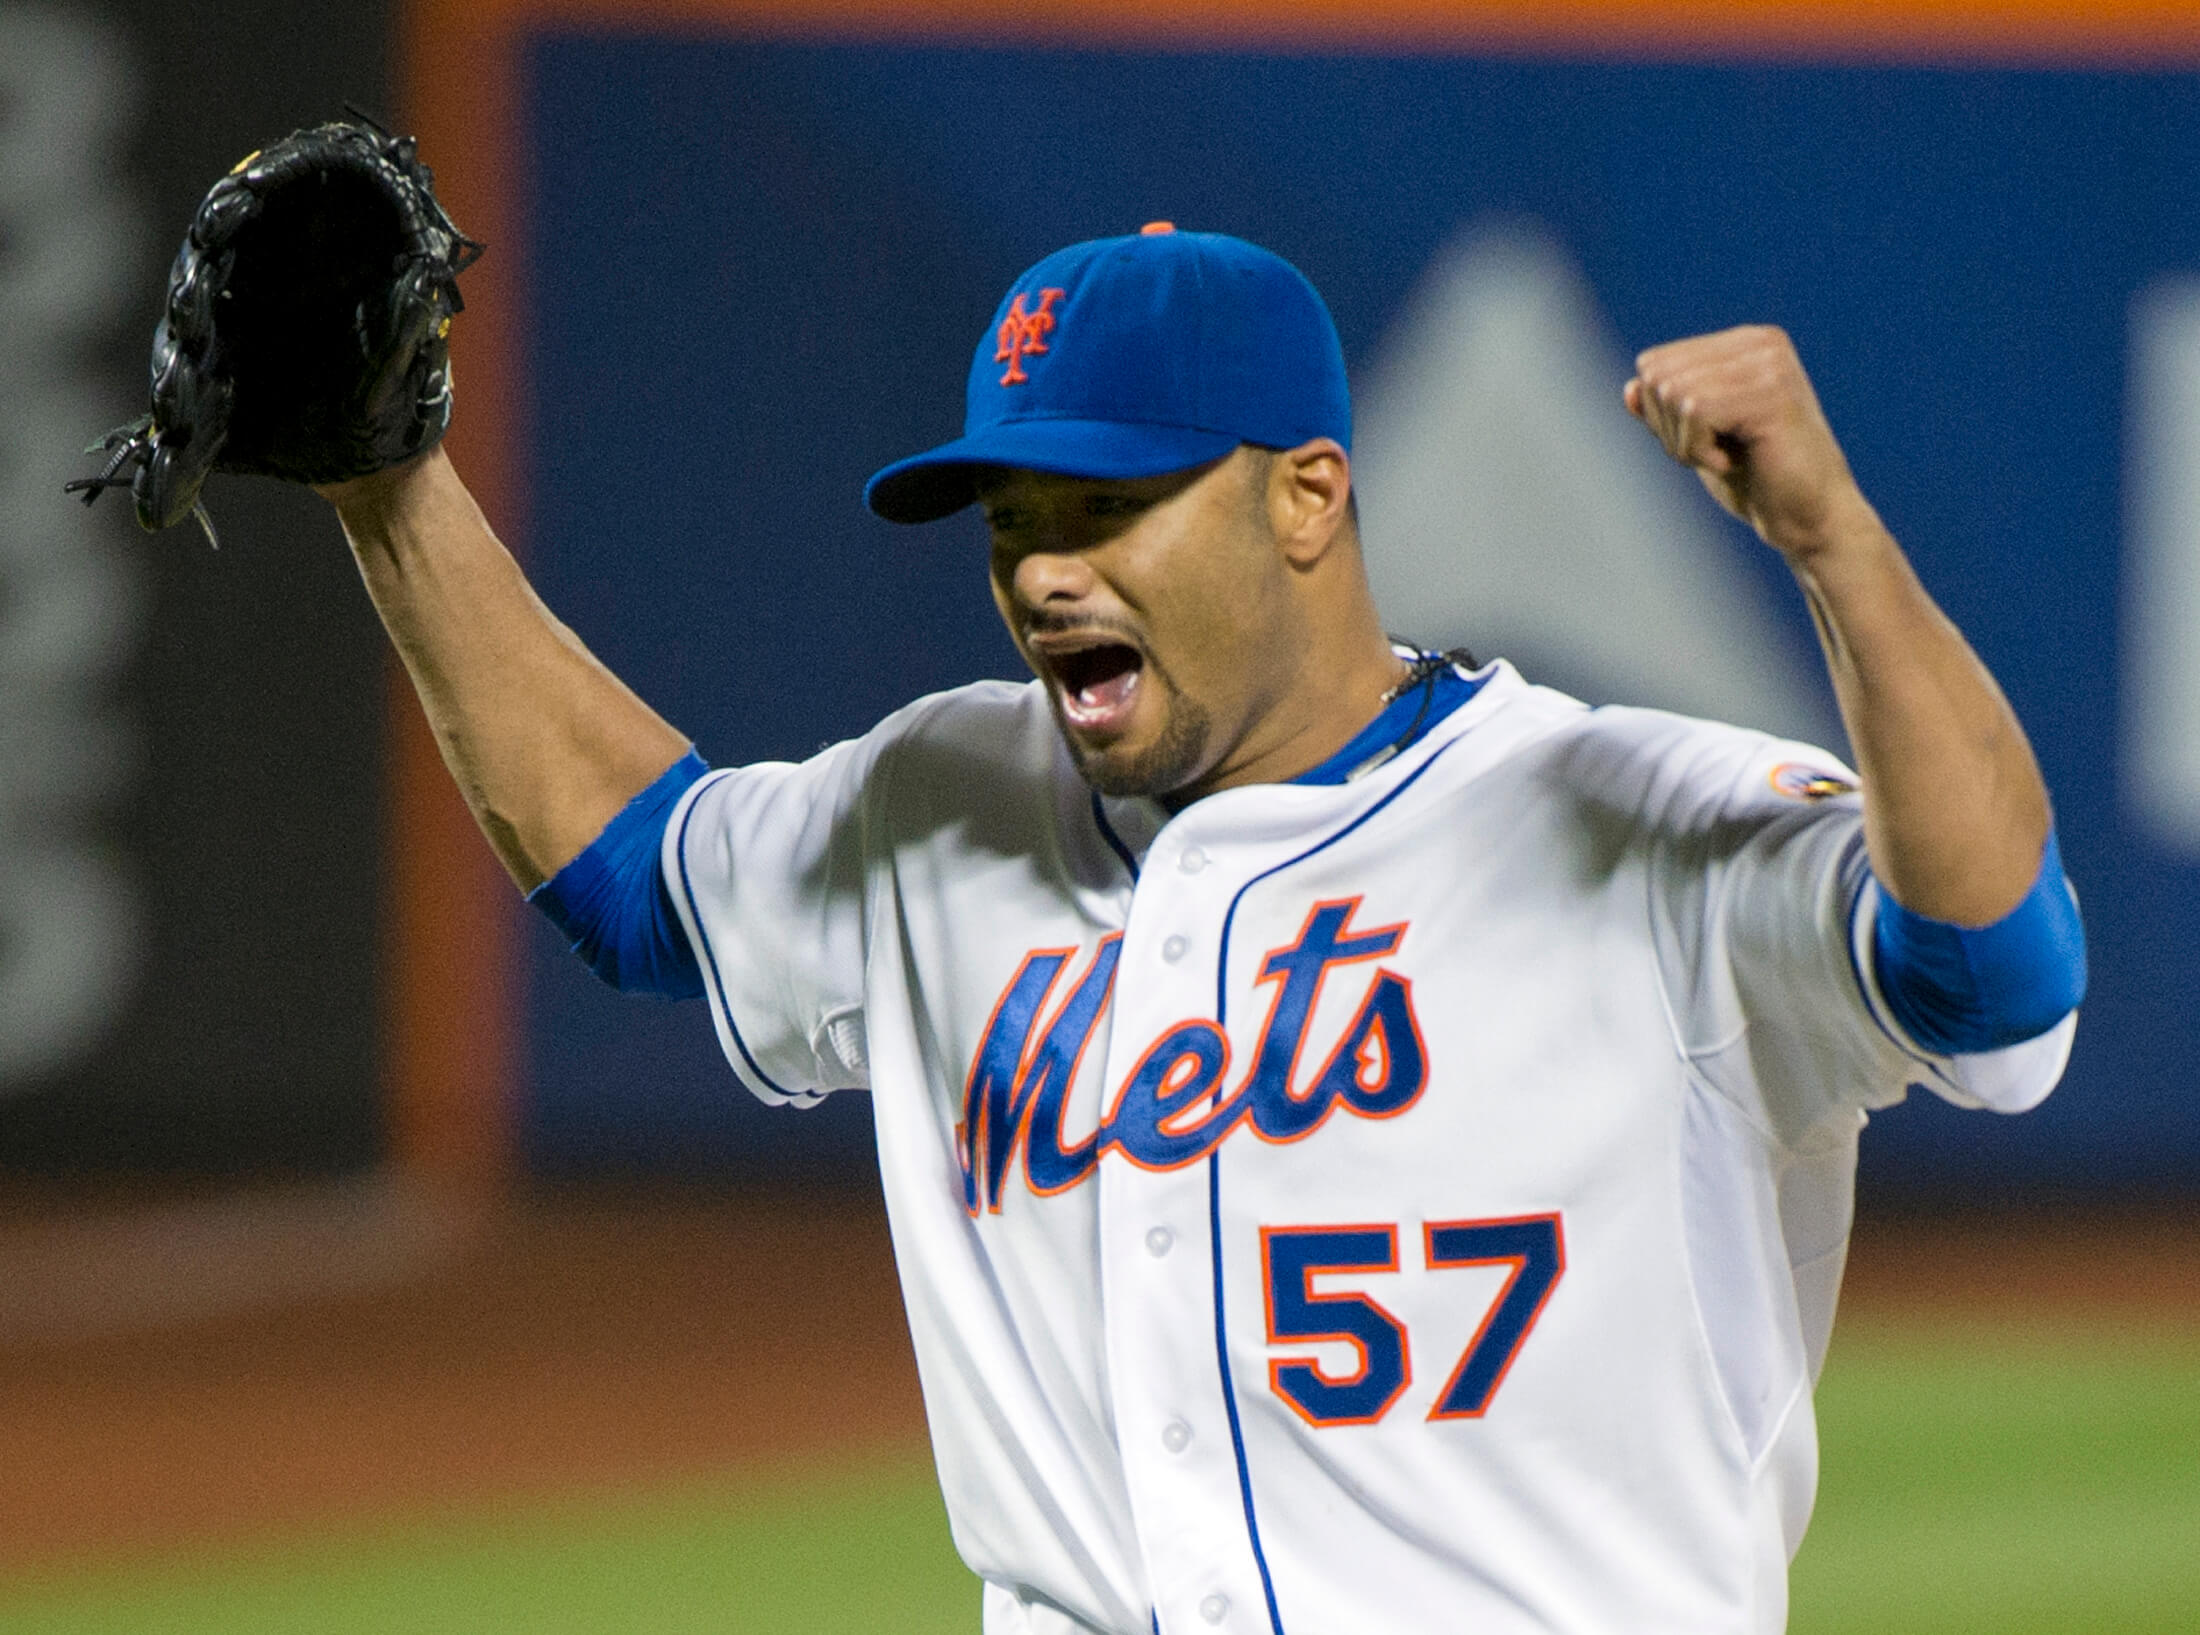 Mets to commemorate 10th anniversary of Johan Santana's historic no-hitter  in 2022